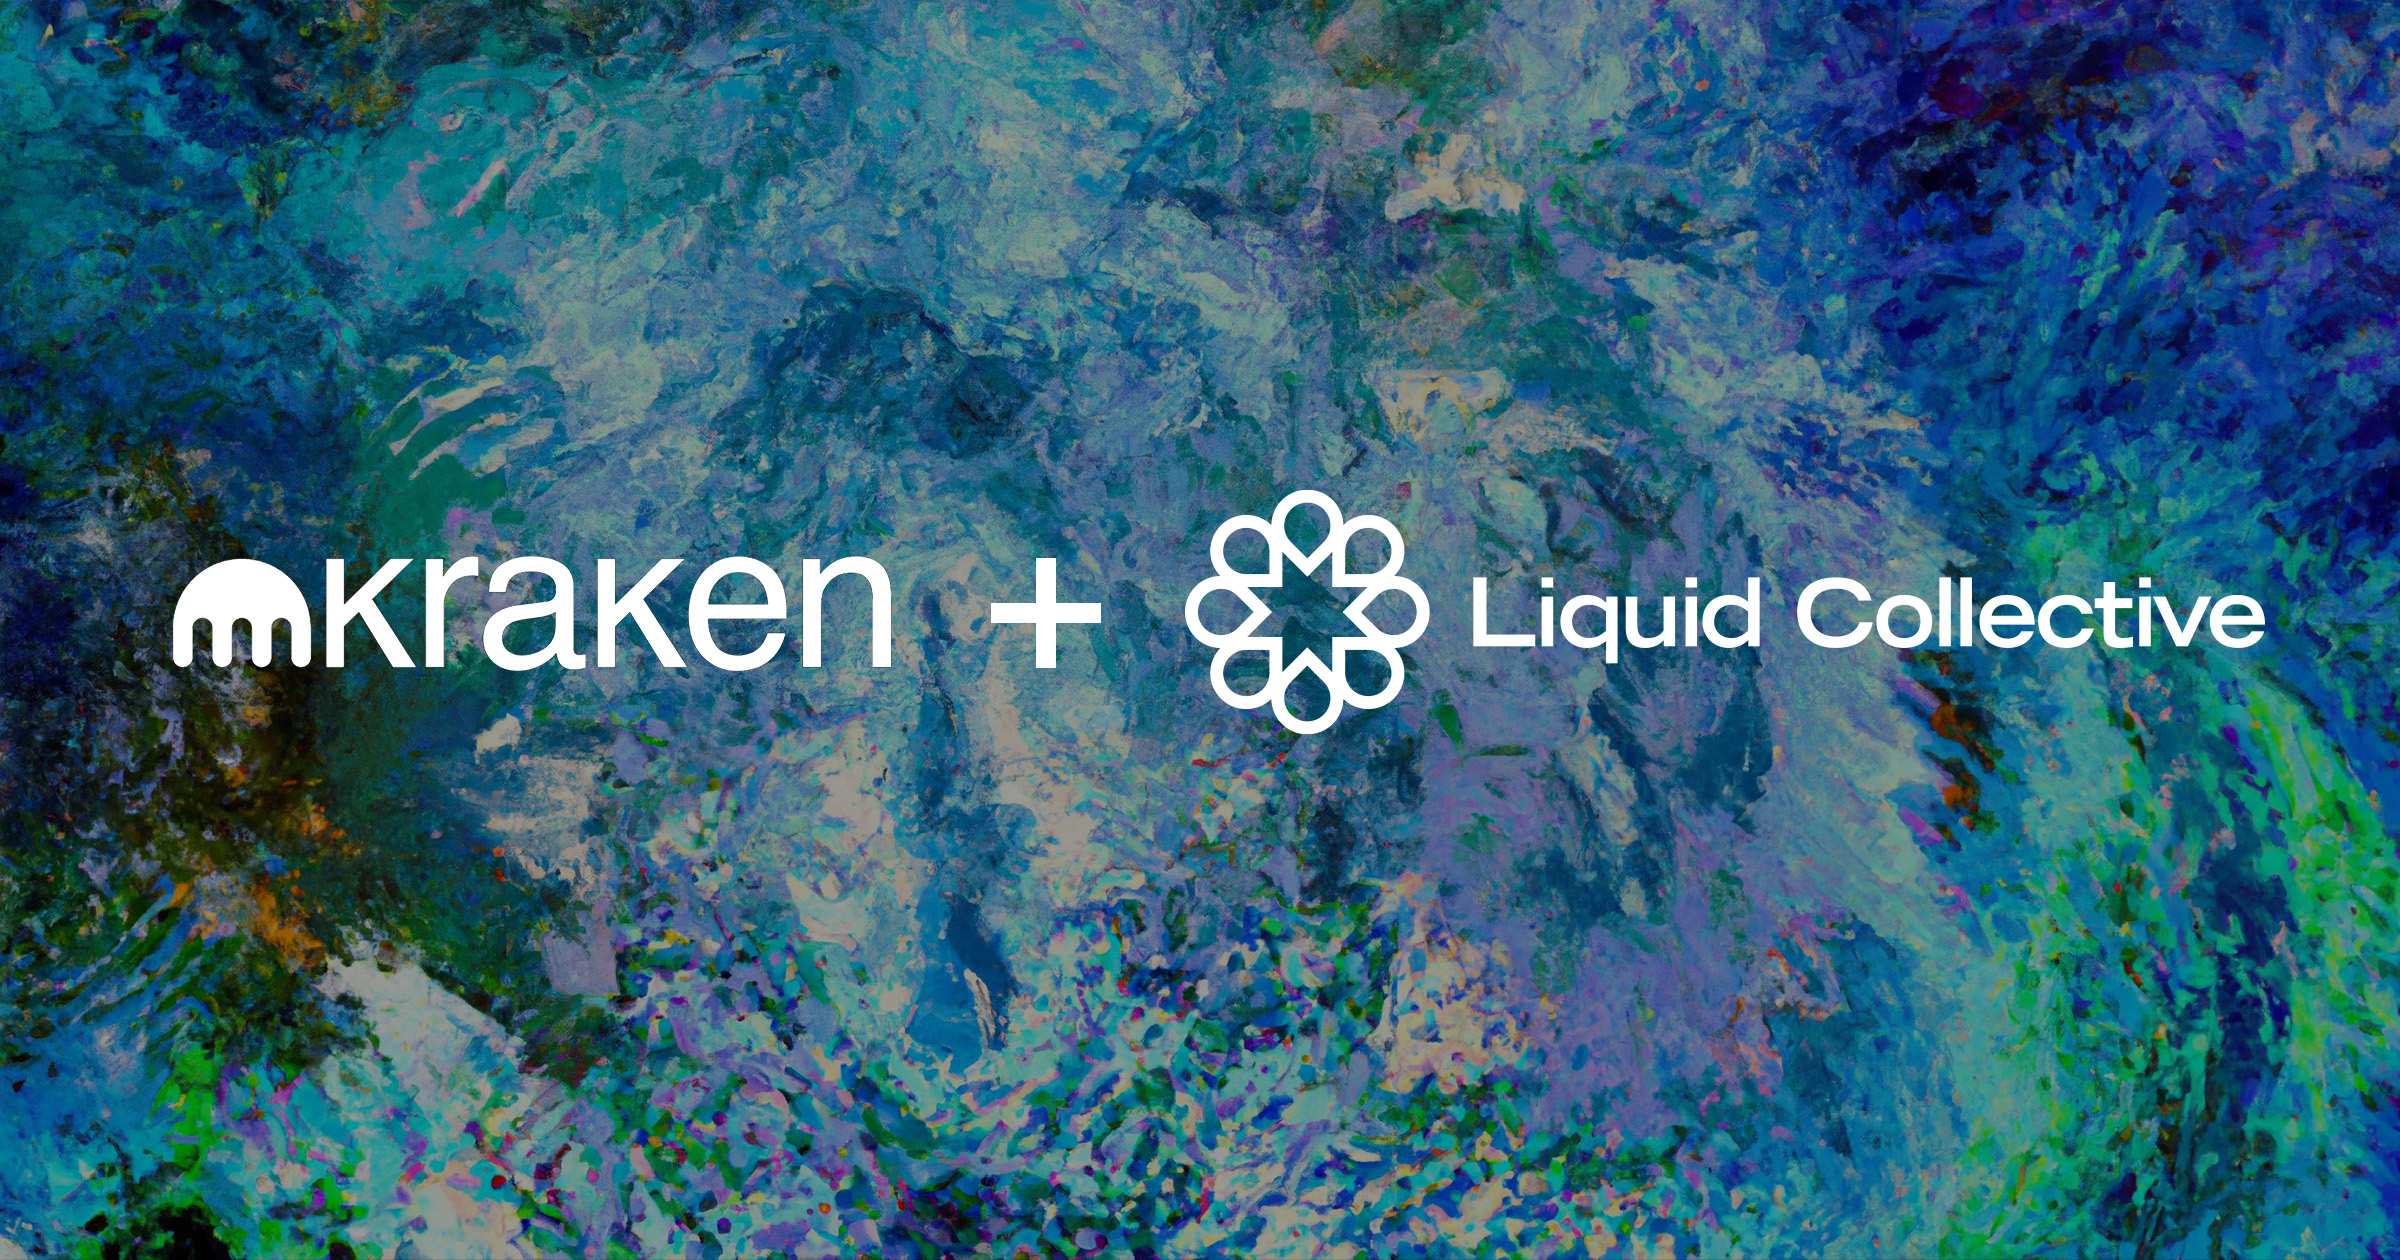 Alluvial Reveals Liquid Collective as Kraken Joins the First Enterprise-Grade Multi-Chain Liquid Staking Protocol